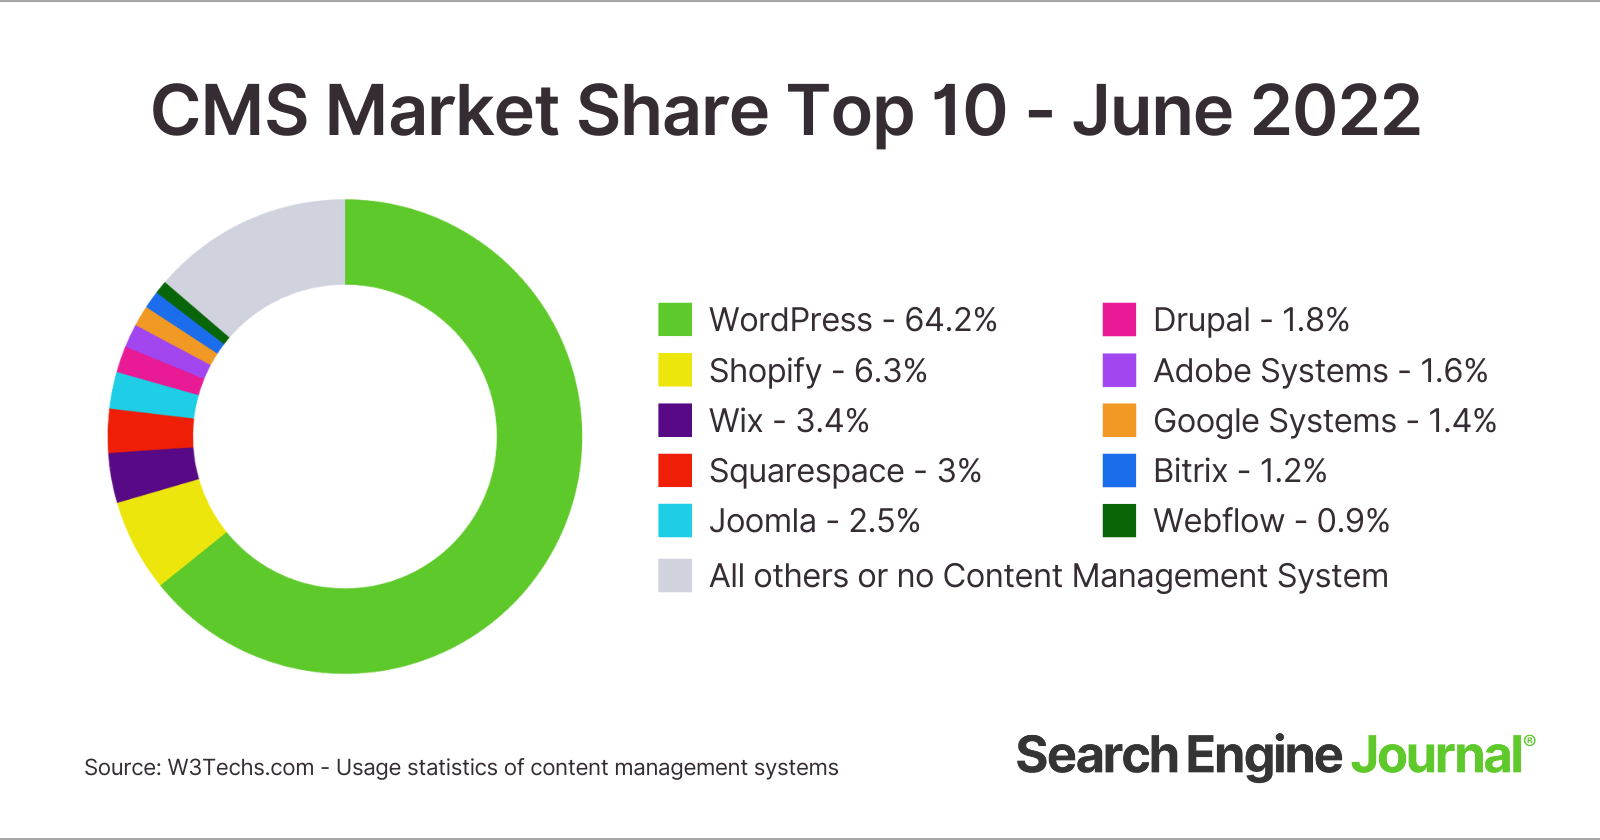 Top 10 market share of content management systems in June 2022.